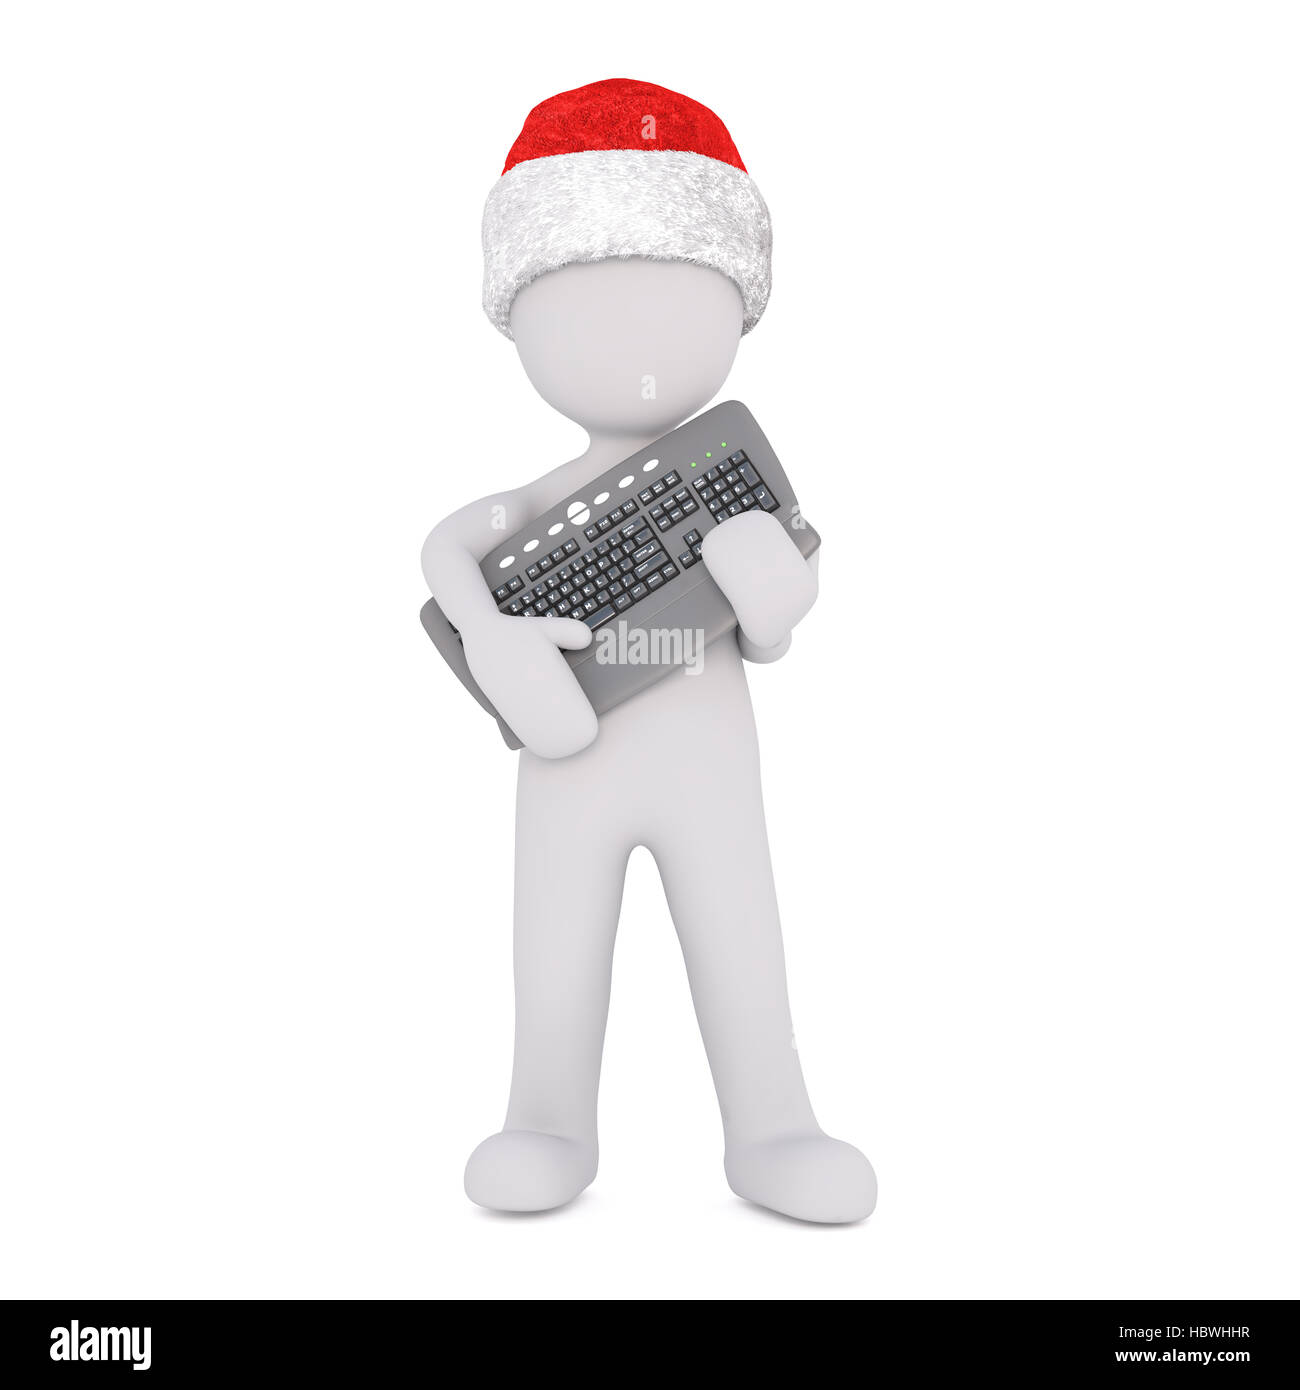 3d man standing clutching a new computer keyboard for Christmas in a red Santa hat, isolated rendered illustration on white Stock Photo